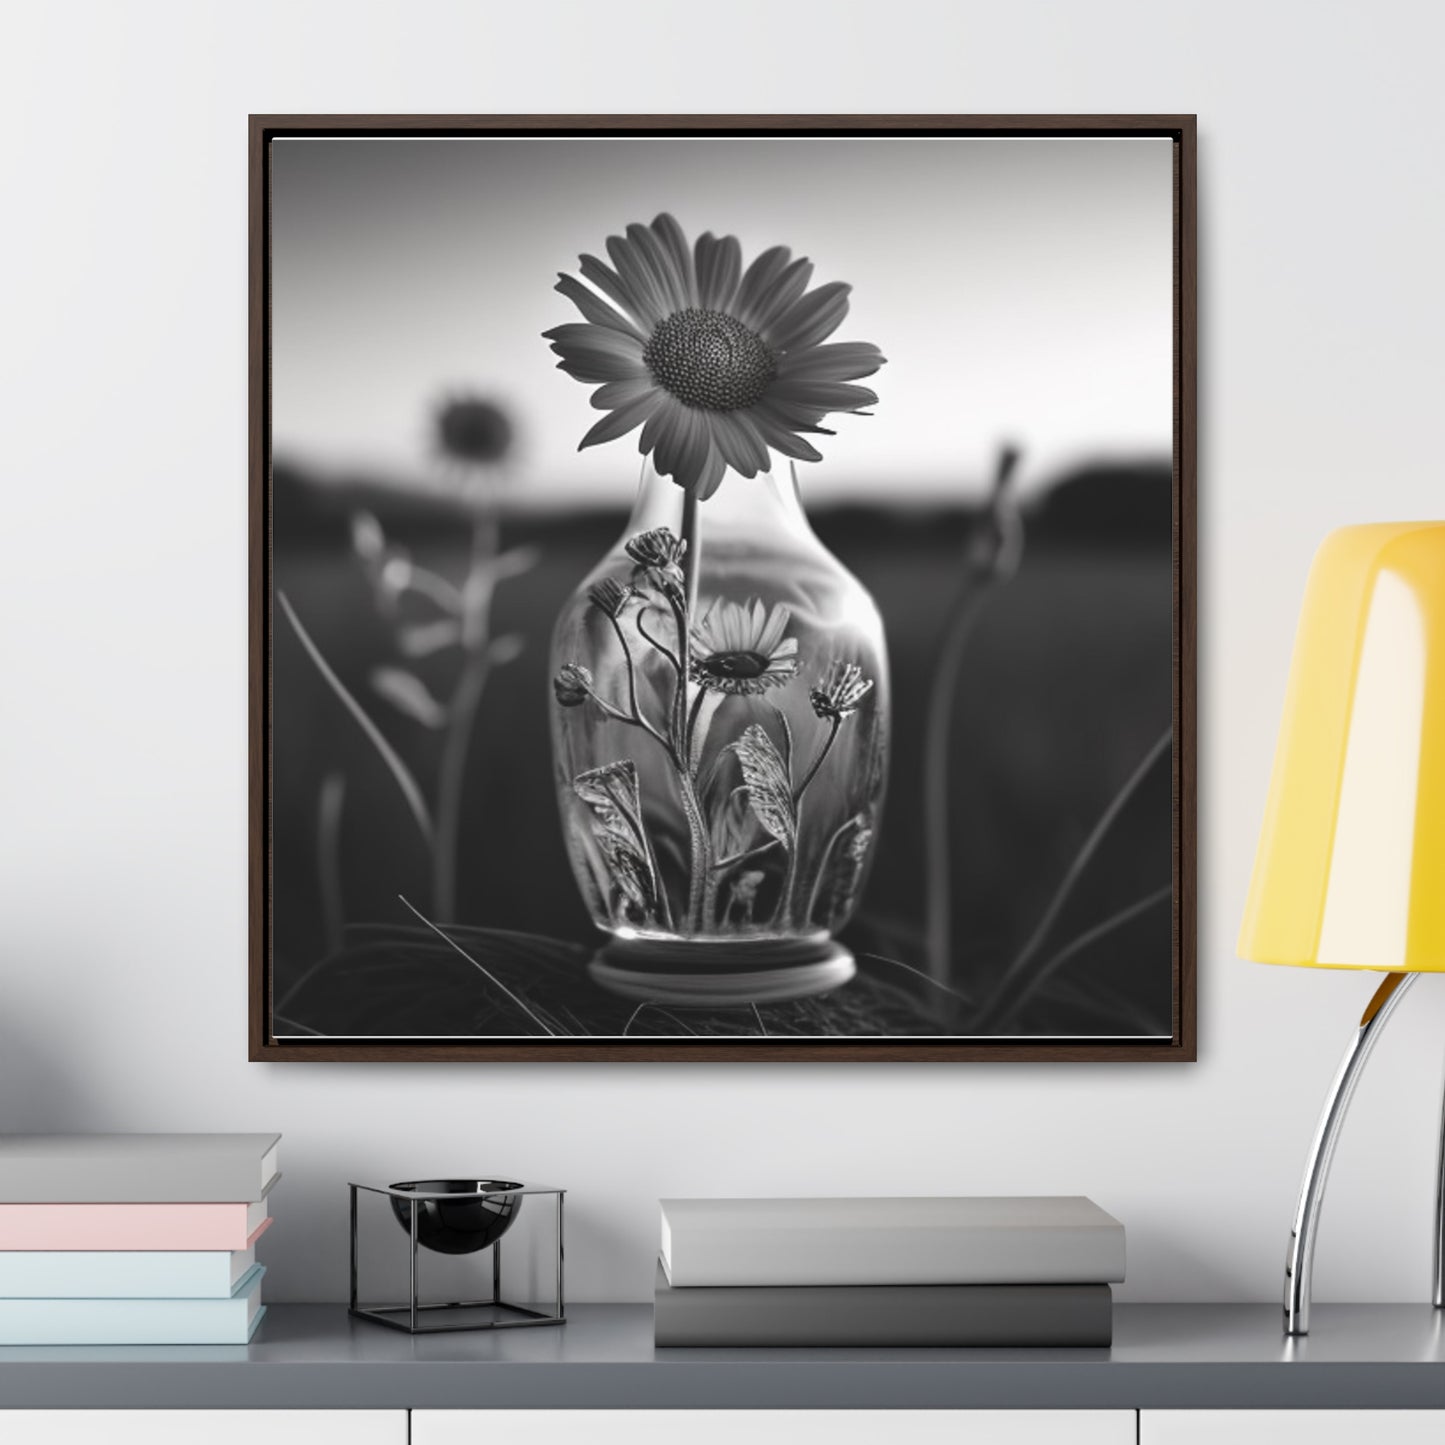 Gallery Canvas Wraps, Square Frame Yellw Sunflower in a vase 2